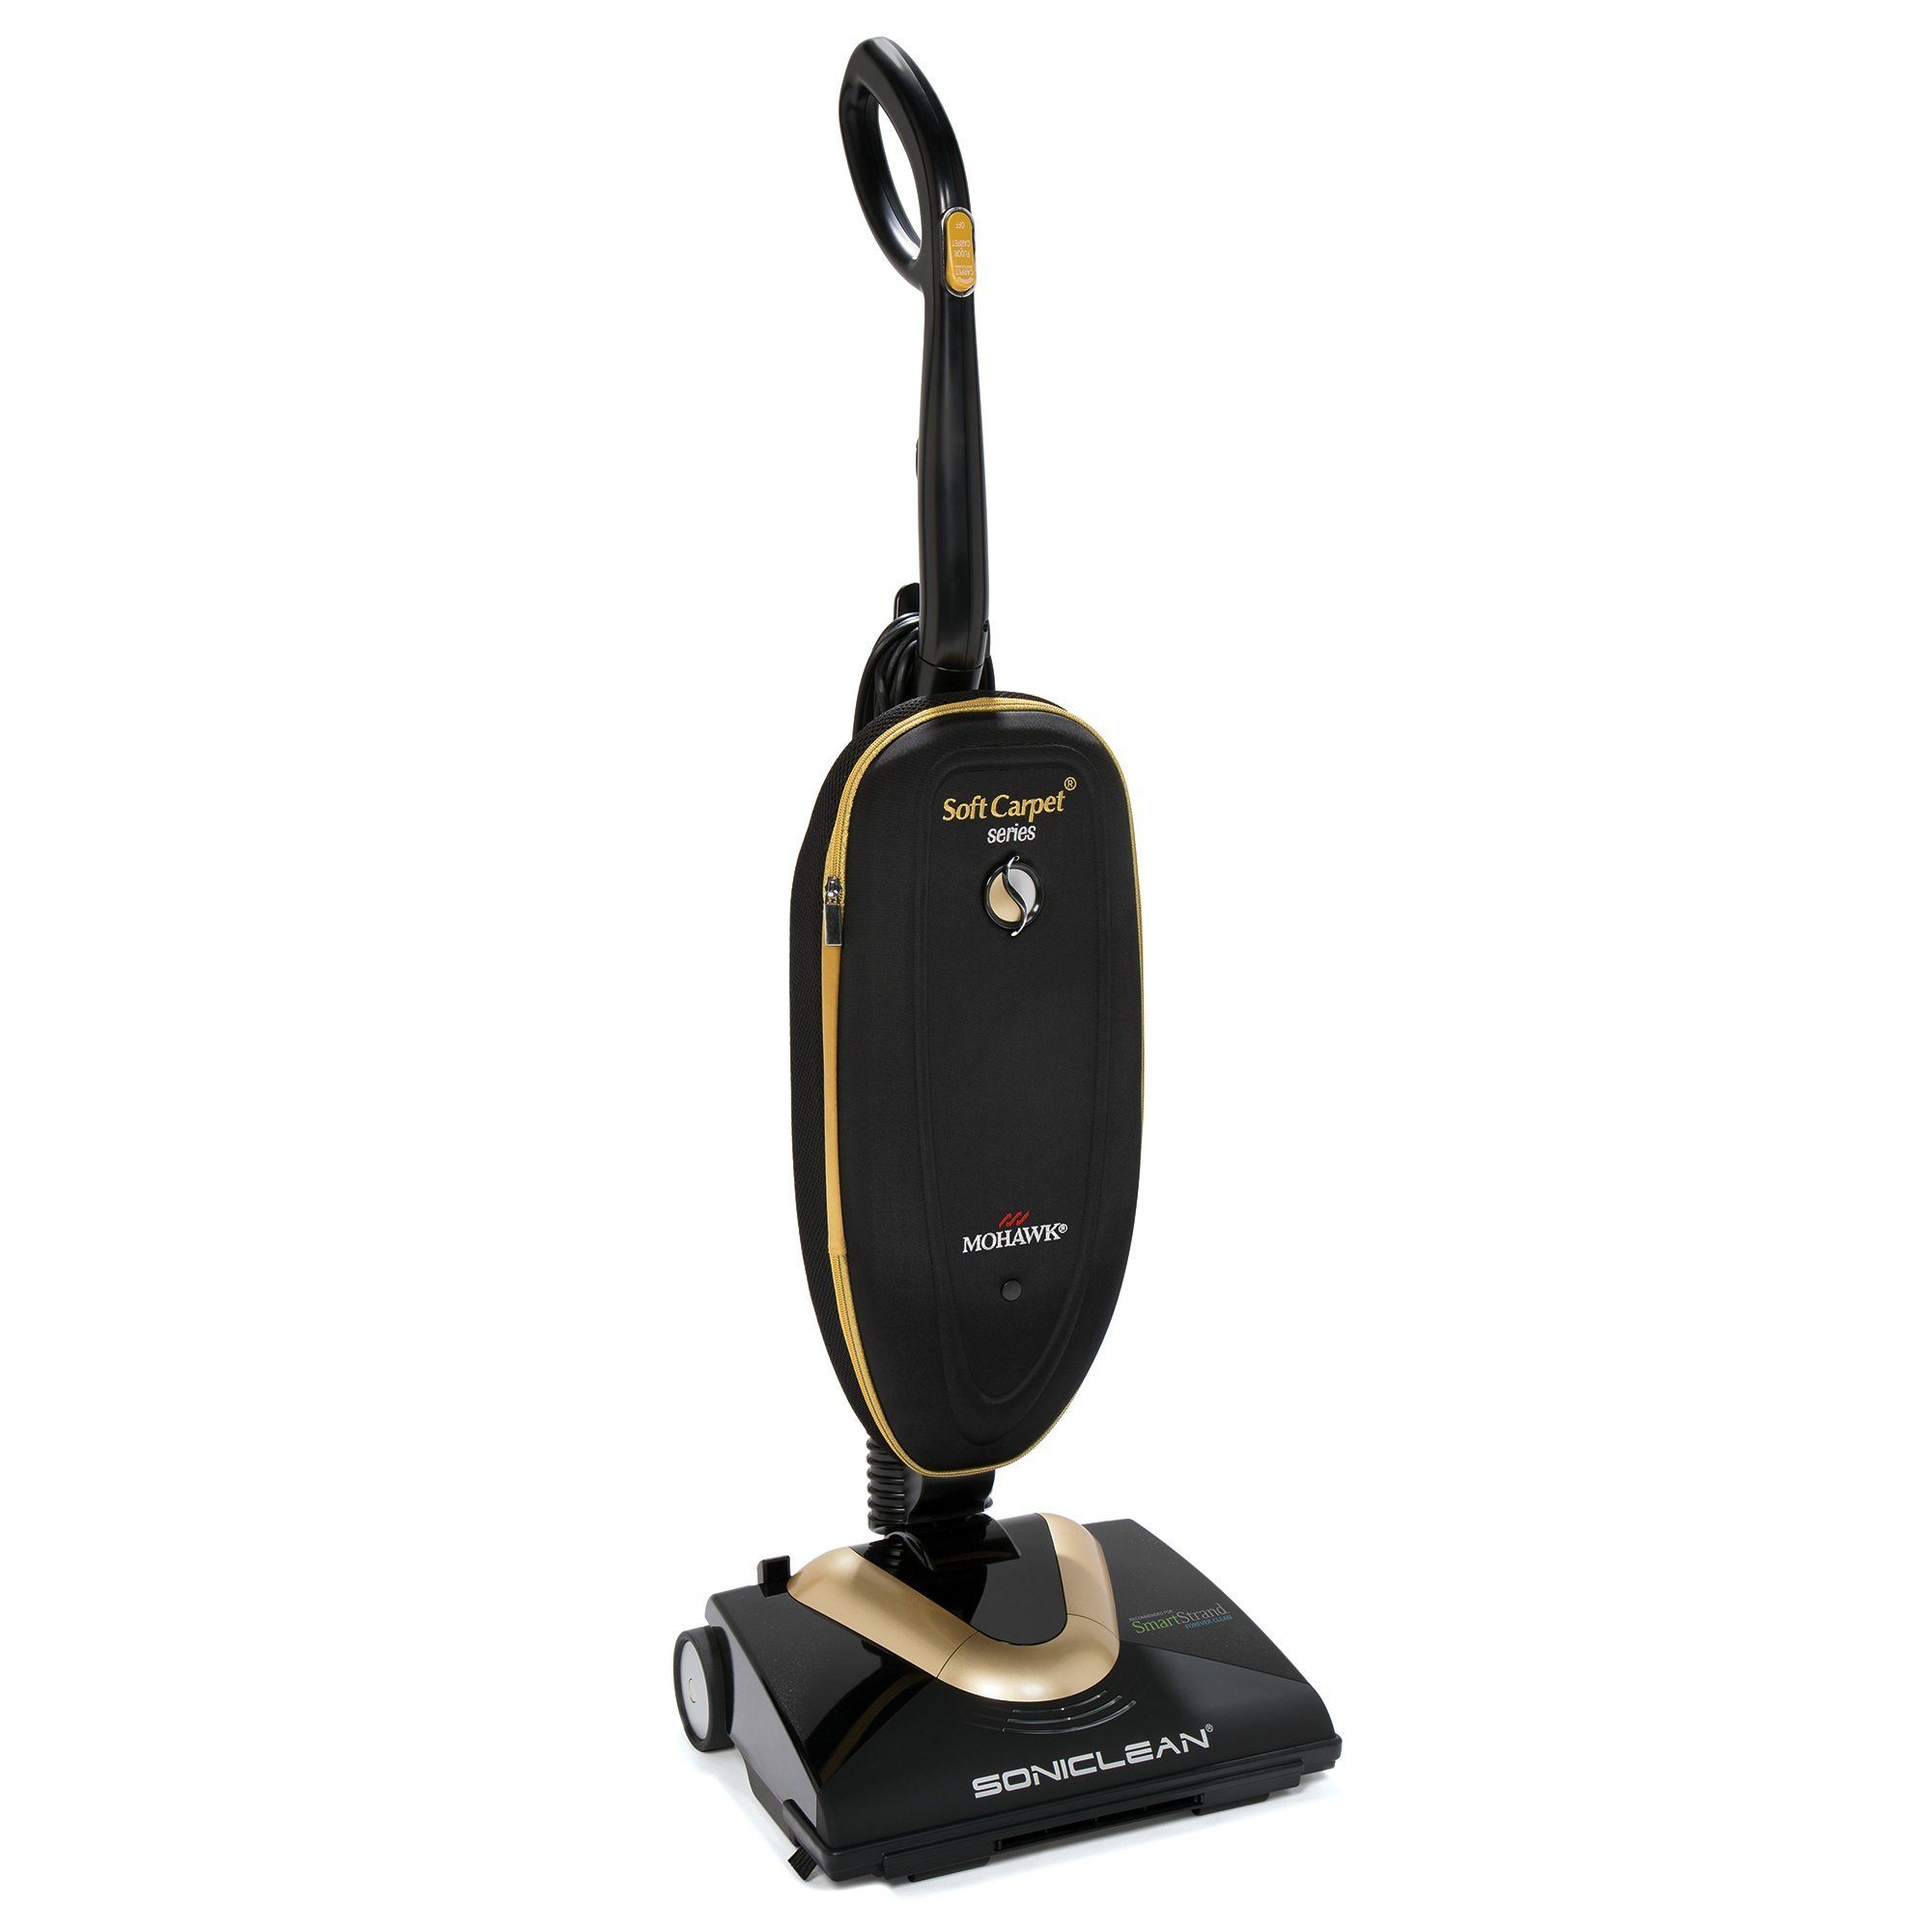 Upright Vacuums & Filters | Soniclean